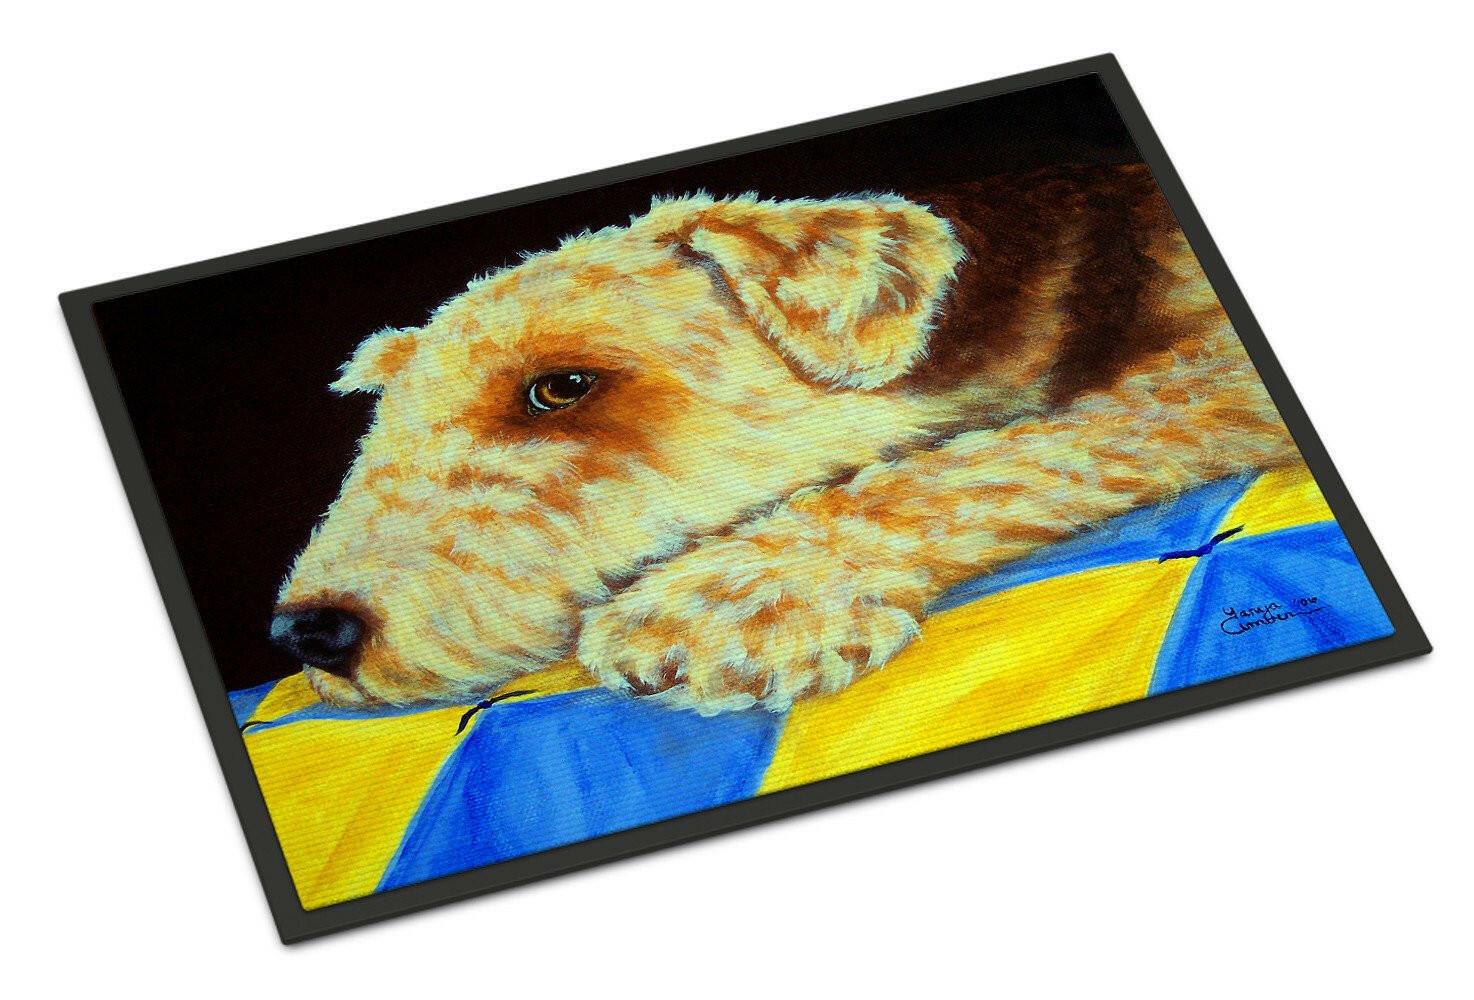 Airedale Terrier Momma's Quilt Indoor or Outdoor Mat 24x36 AMB1174JMAT - the-store.com